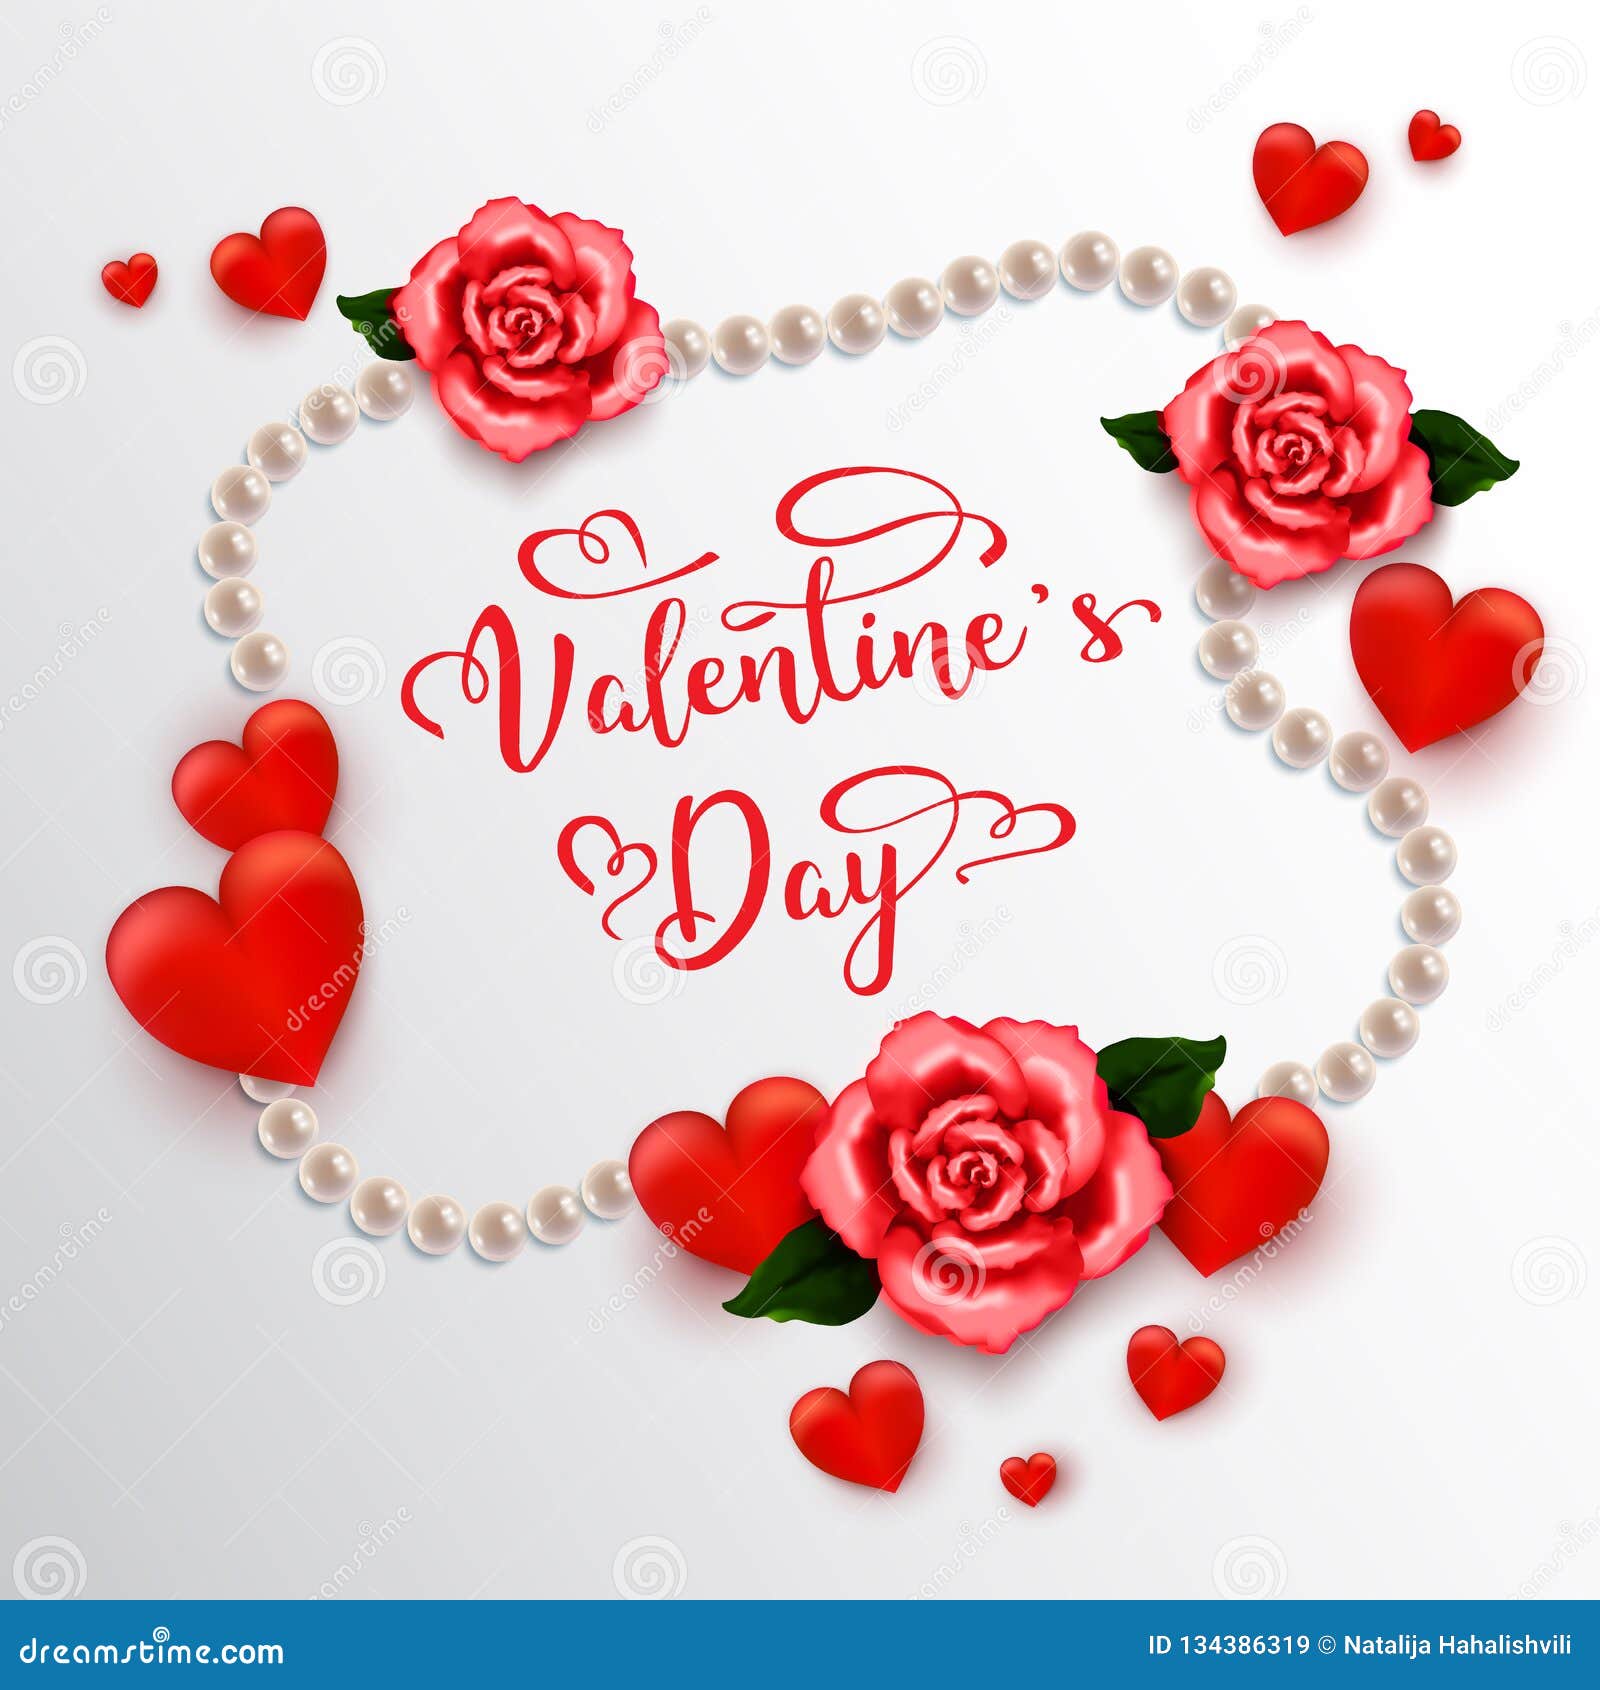 Valentine`s day, holiday objects on white background. Vector illustration. Hearts, pearl beads and flowers